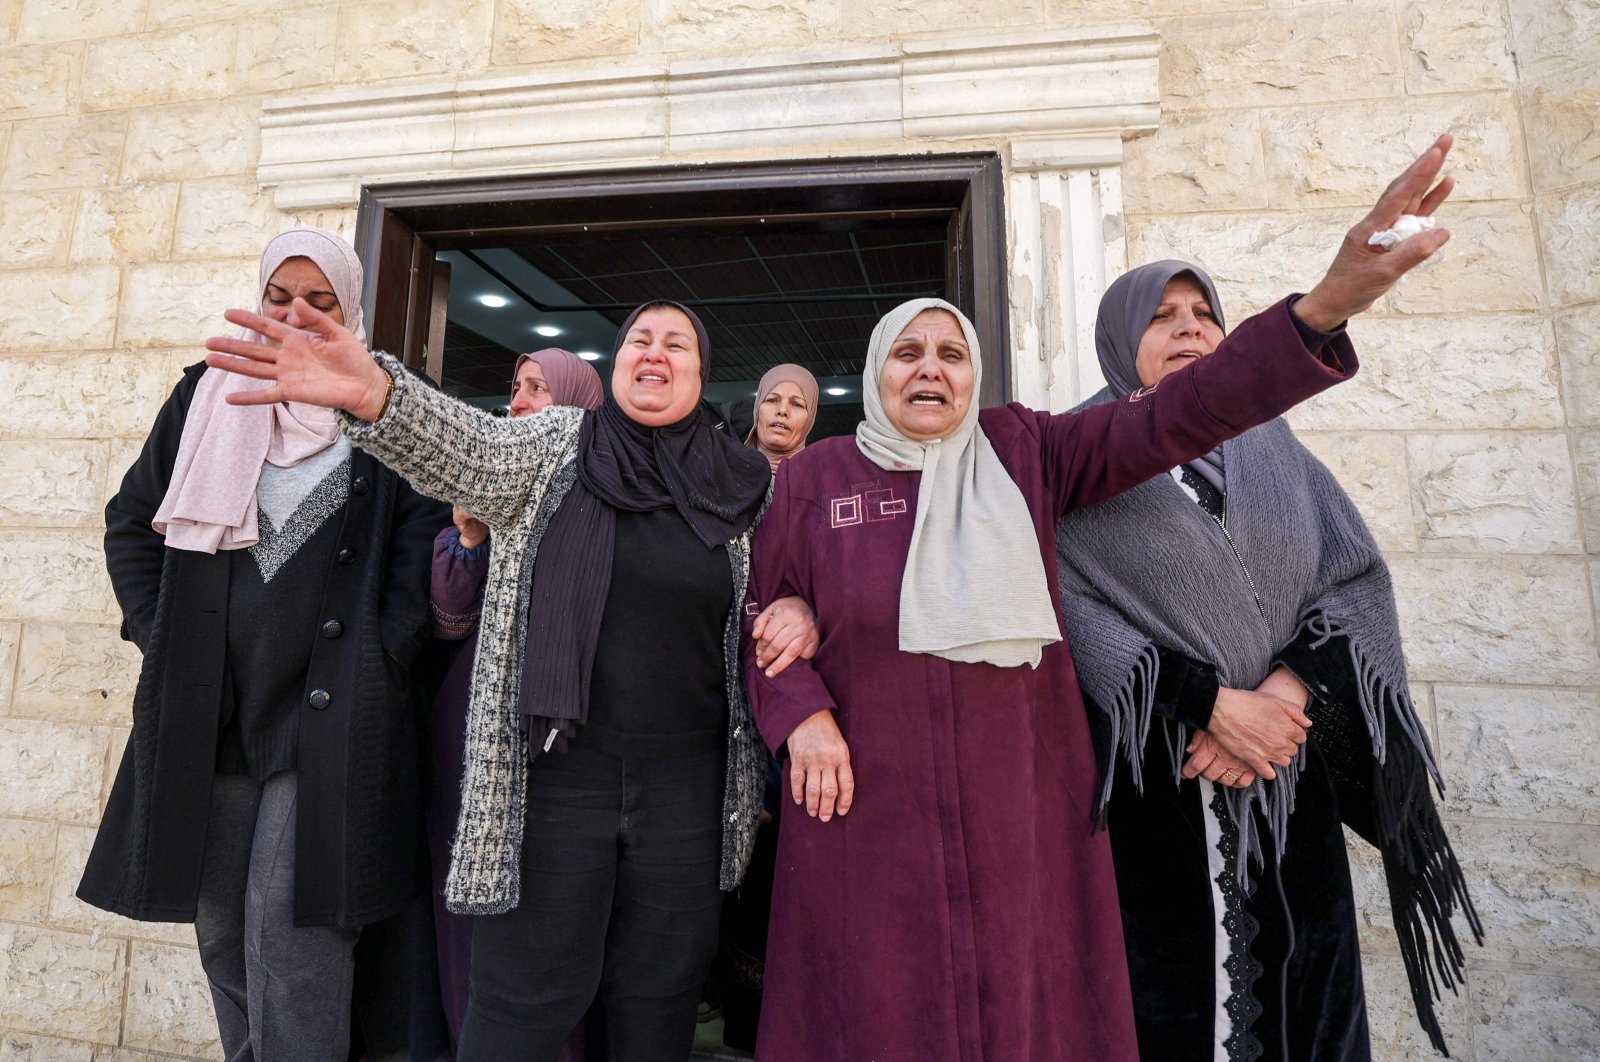 Relatives of Mahmud Abu Alheja, one of the two Palestinian youths killed in an Israeli army raid in Jenin, mourn in occupied West Bank, Palestine, March 13, 2024. (AFP Photo)